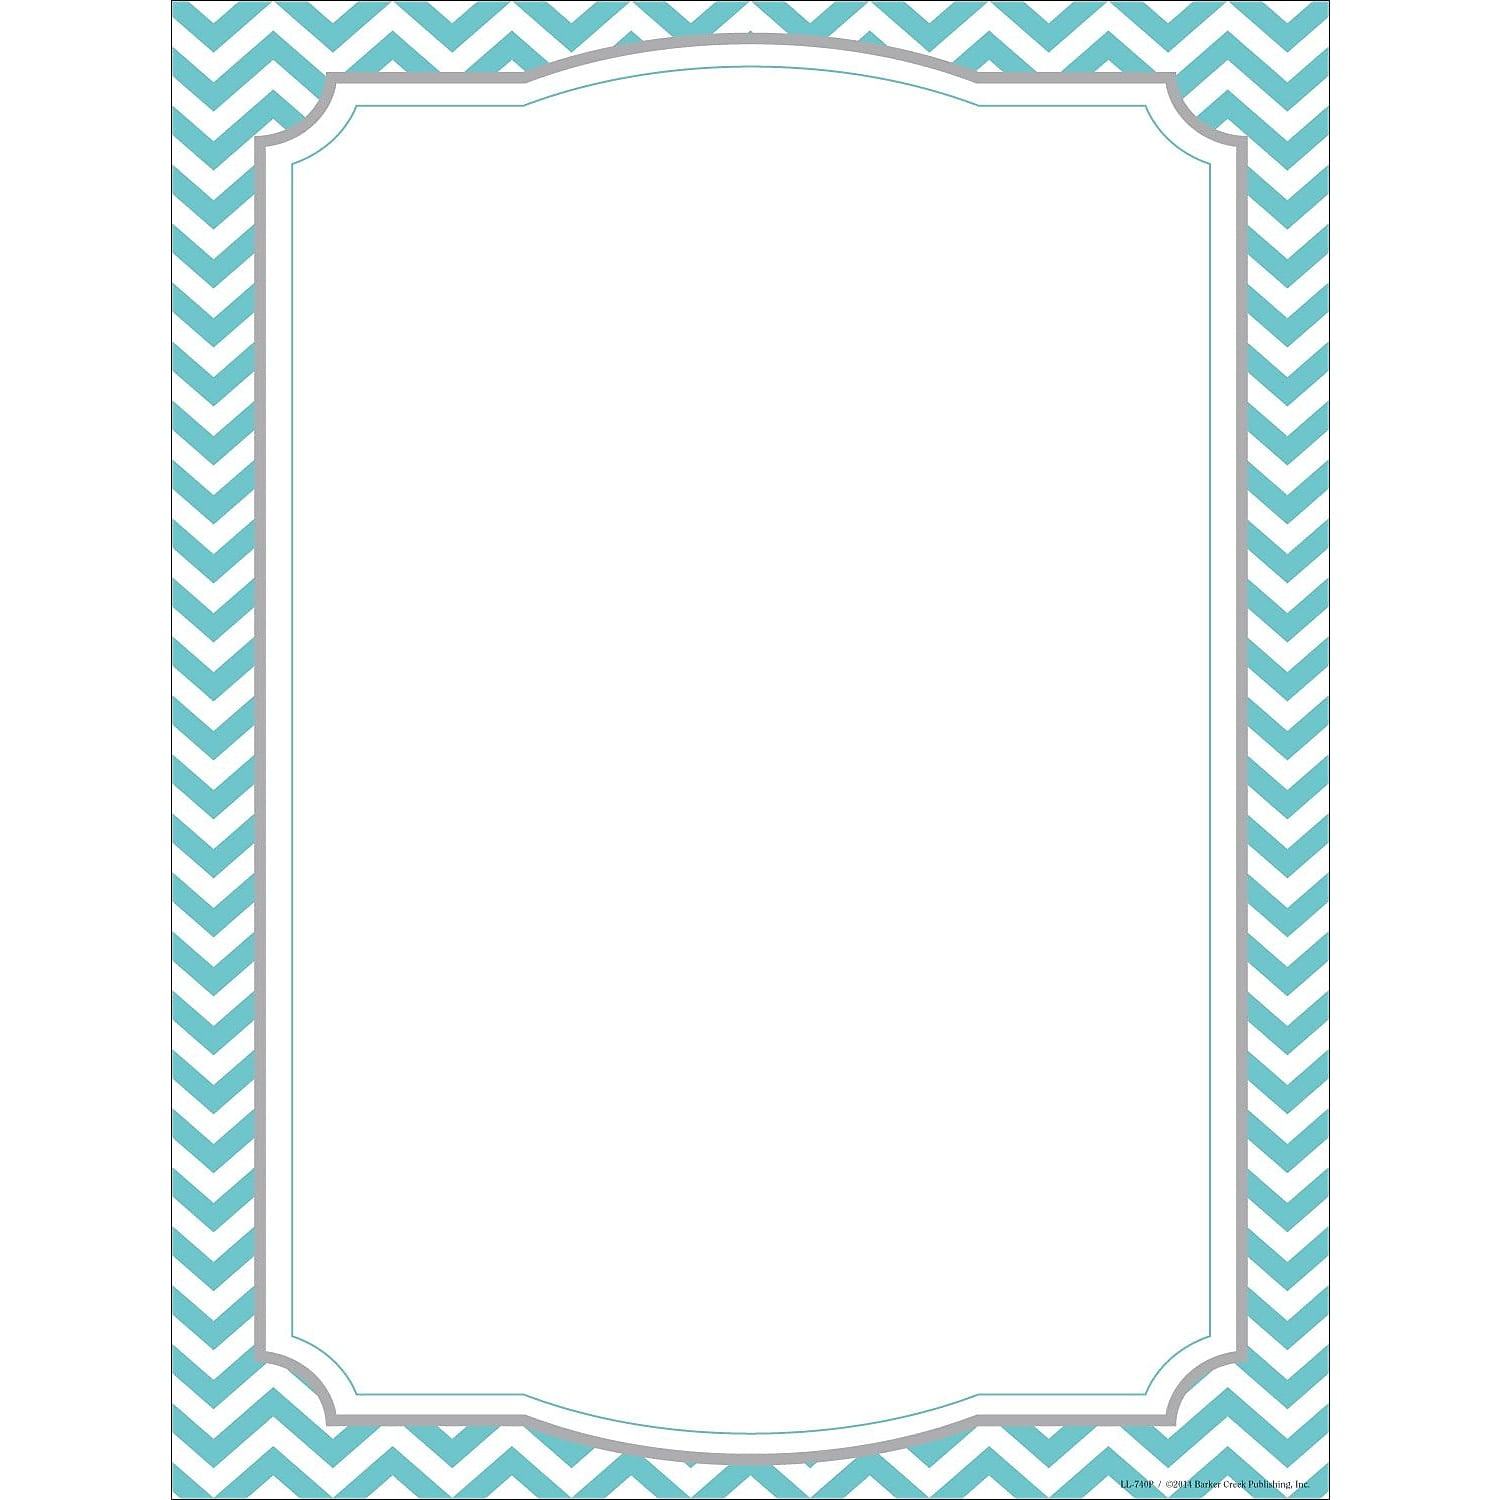 Barker Creek Computer Paper 8 12 x 11 Turquoise Chevron Pack Of 50